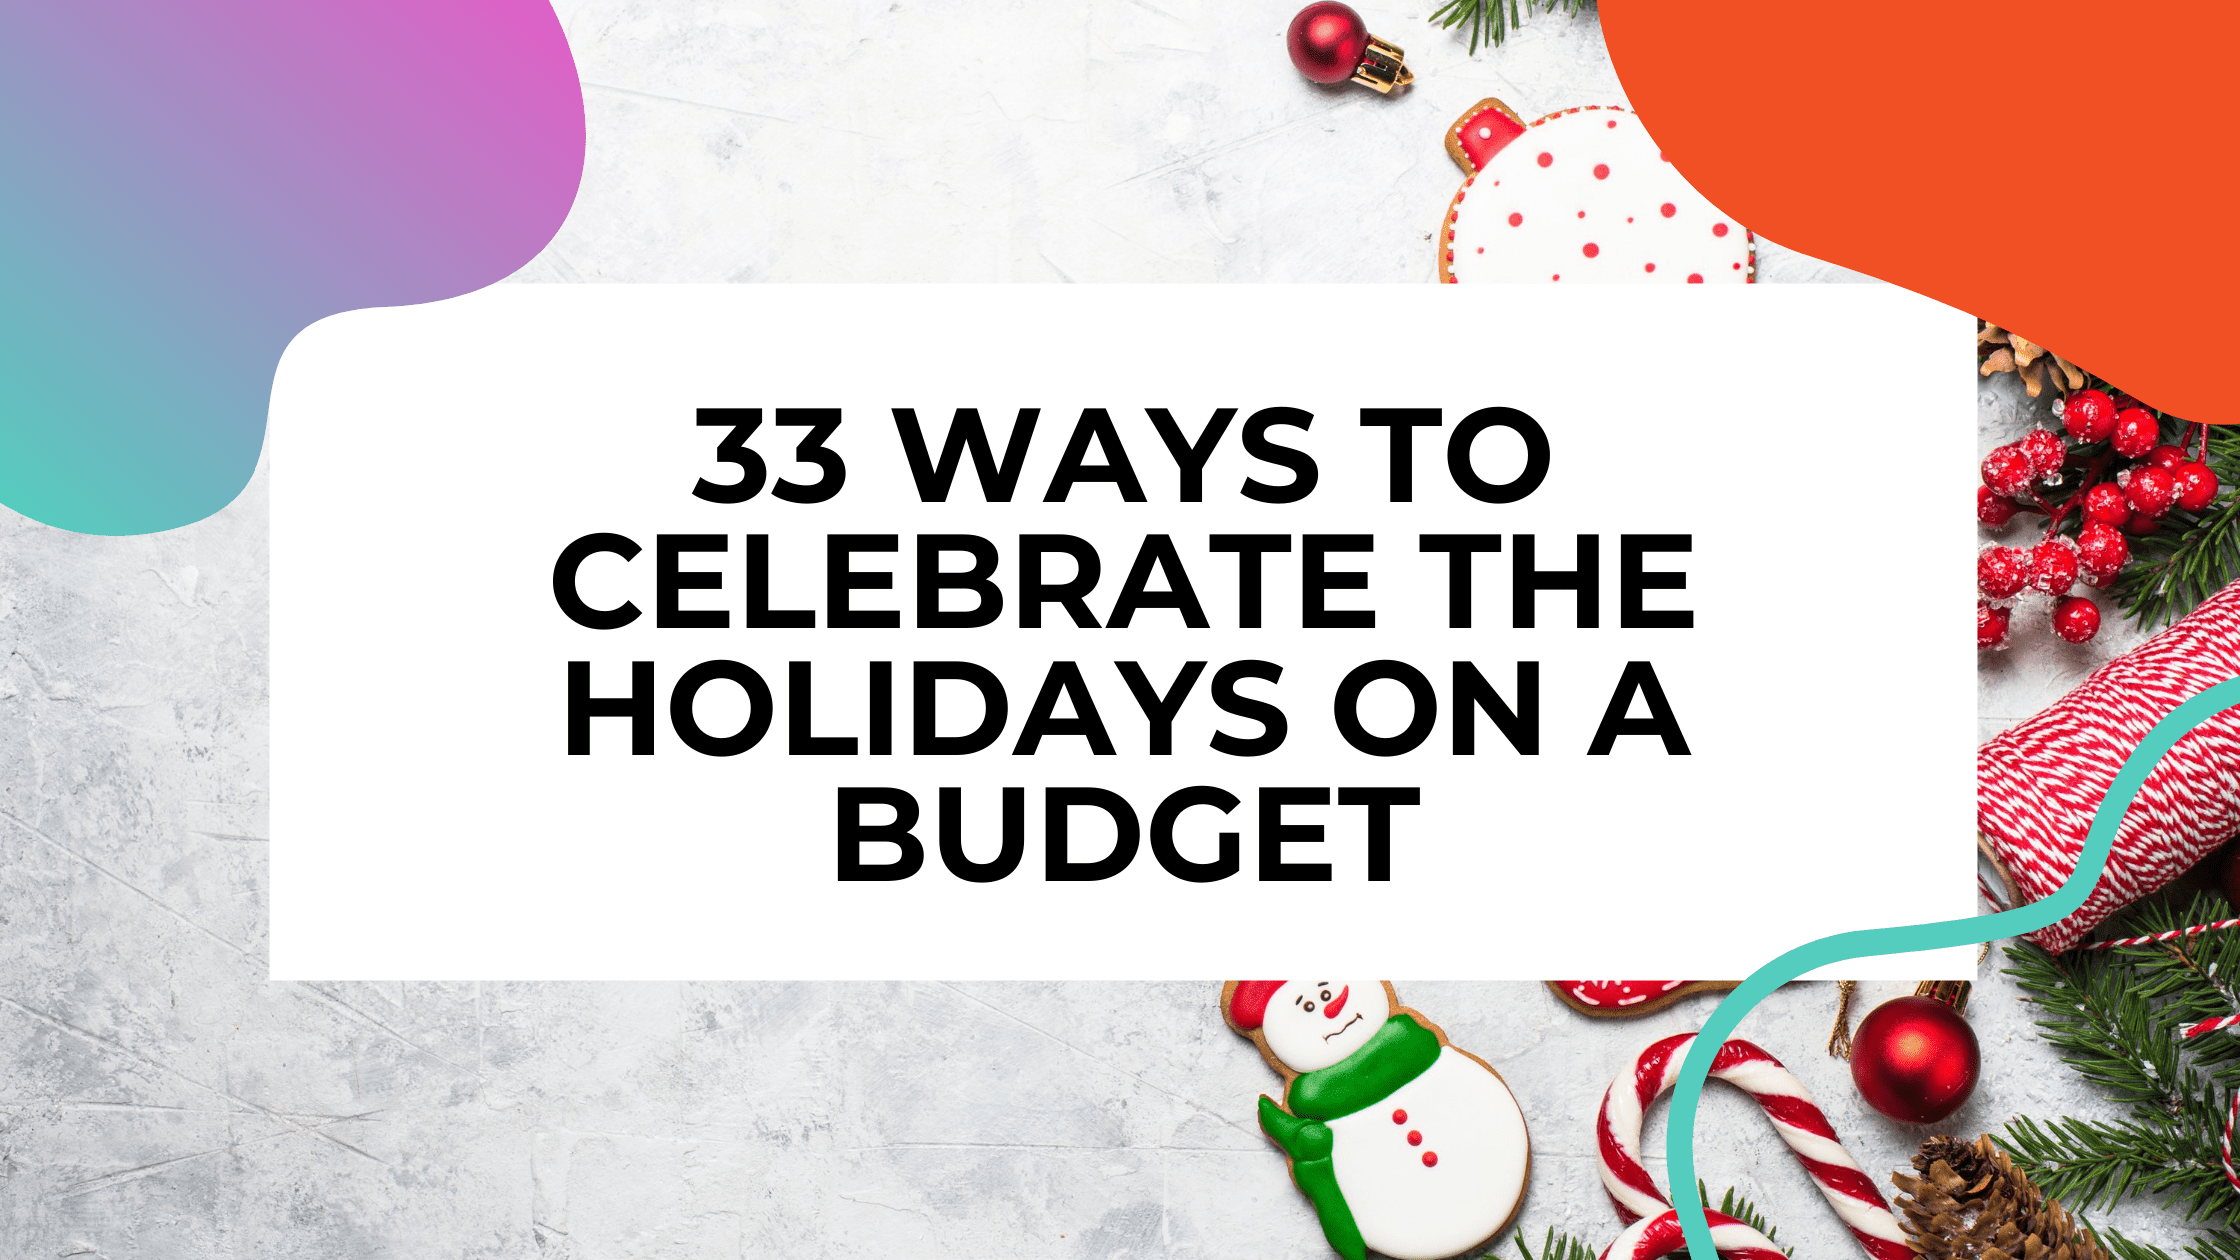 christmas cookies and tinsel on a tables with text that reads: 33 ways to celebrate the holidays on a budget